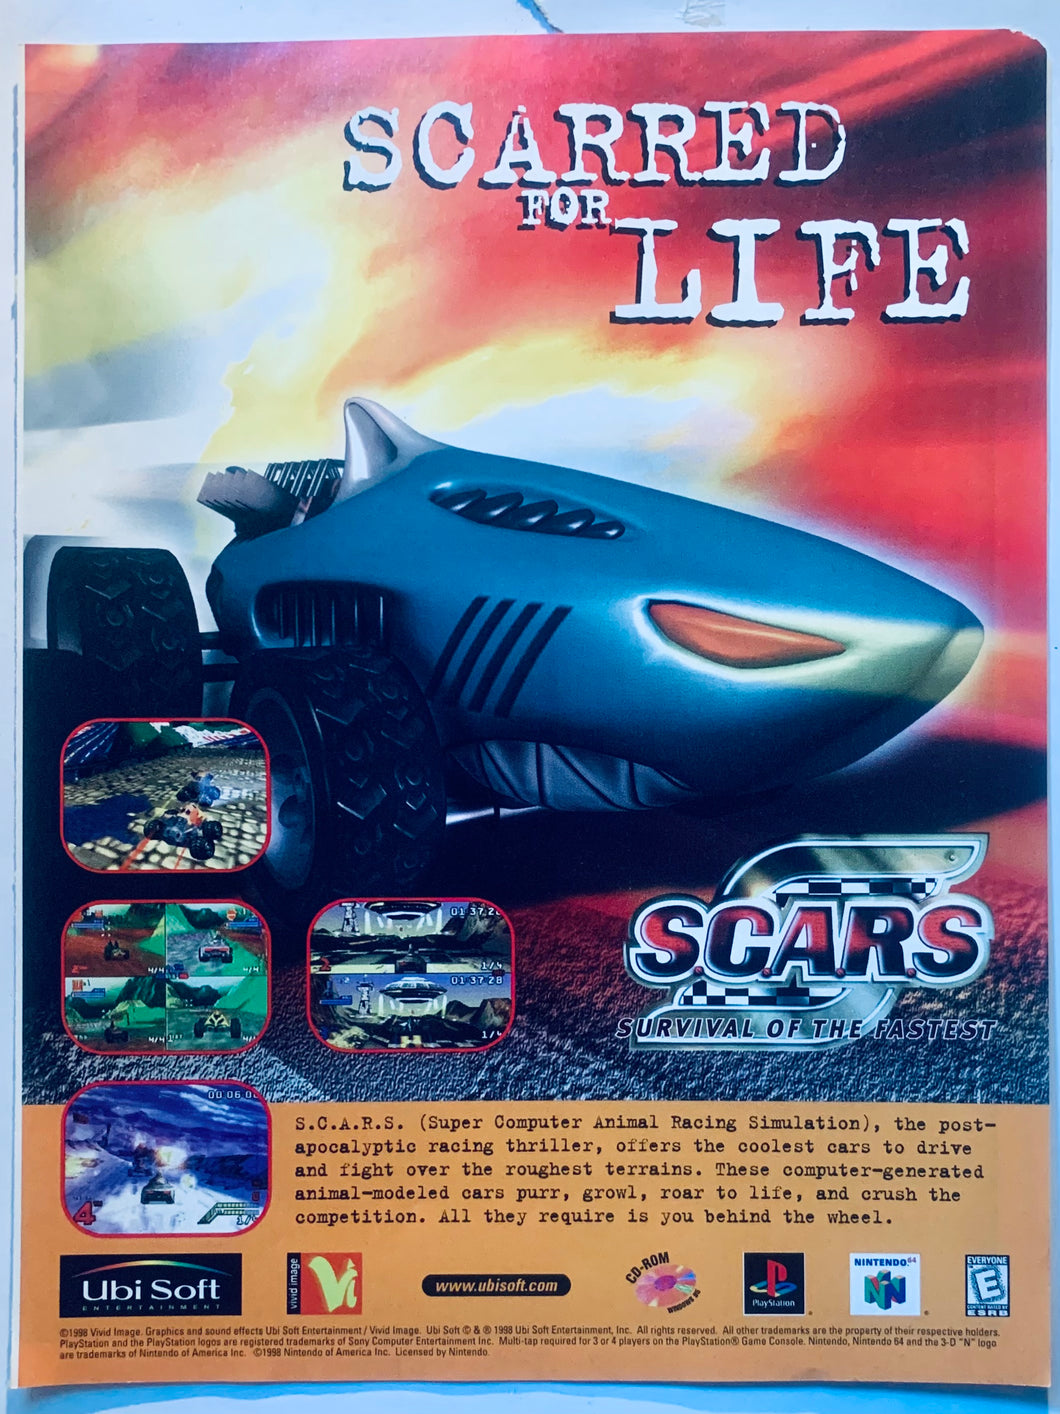 S.C.A.R.S. - PlayStation N64 PC - Original Vintage Advertisement - Print Ads - Laminated A4 Poster